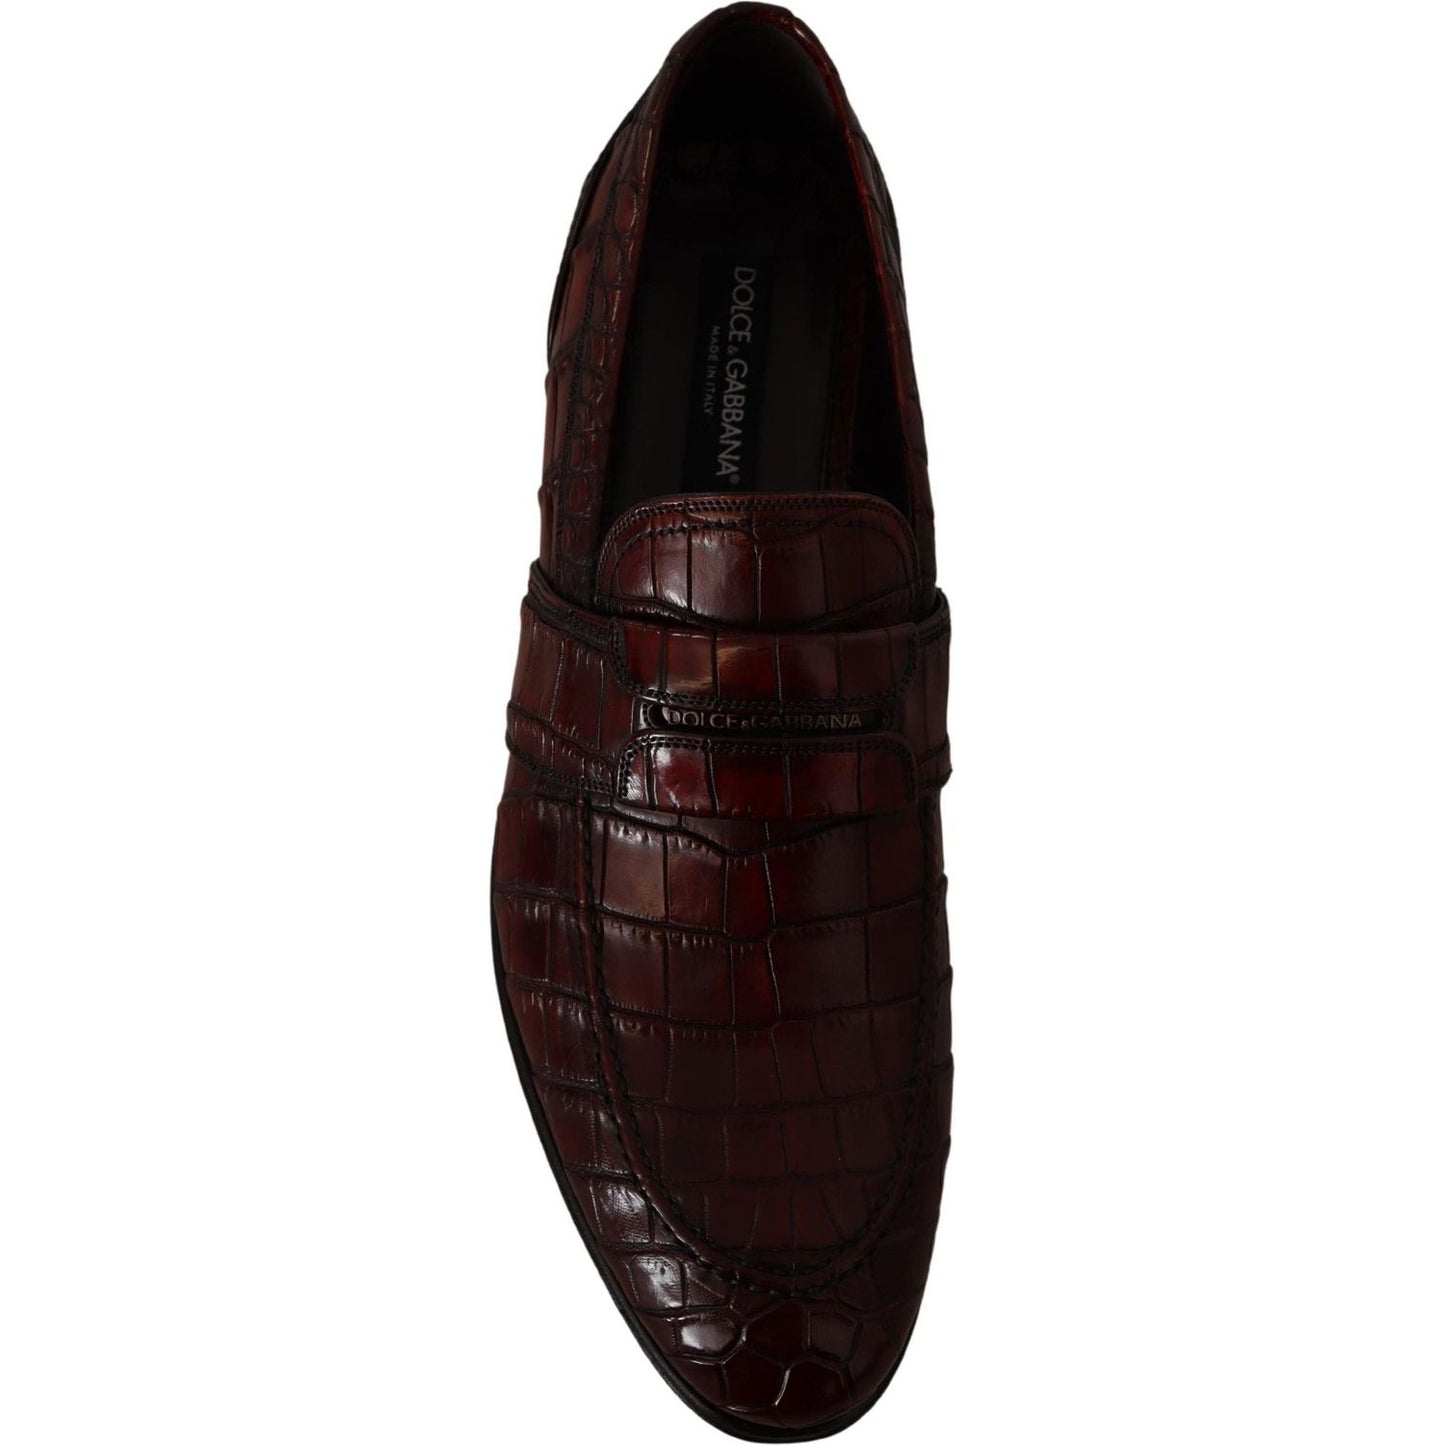 Dolce & Gabbana Exotic Croc Leather Bordeaux Loafers bordeaux-exotic-leather-dress-derby-shoes IMG_2088-scaled-79d9fc51-a0c.jpg